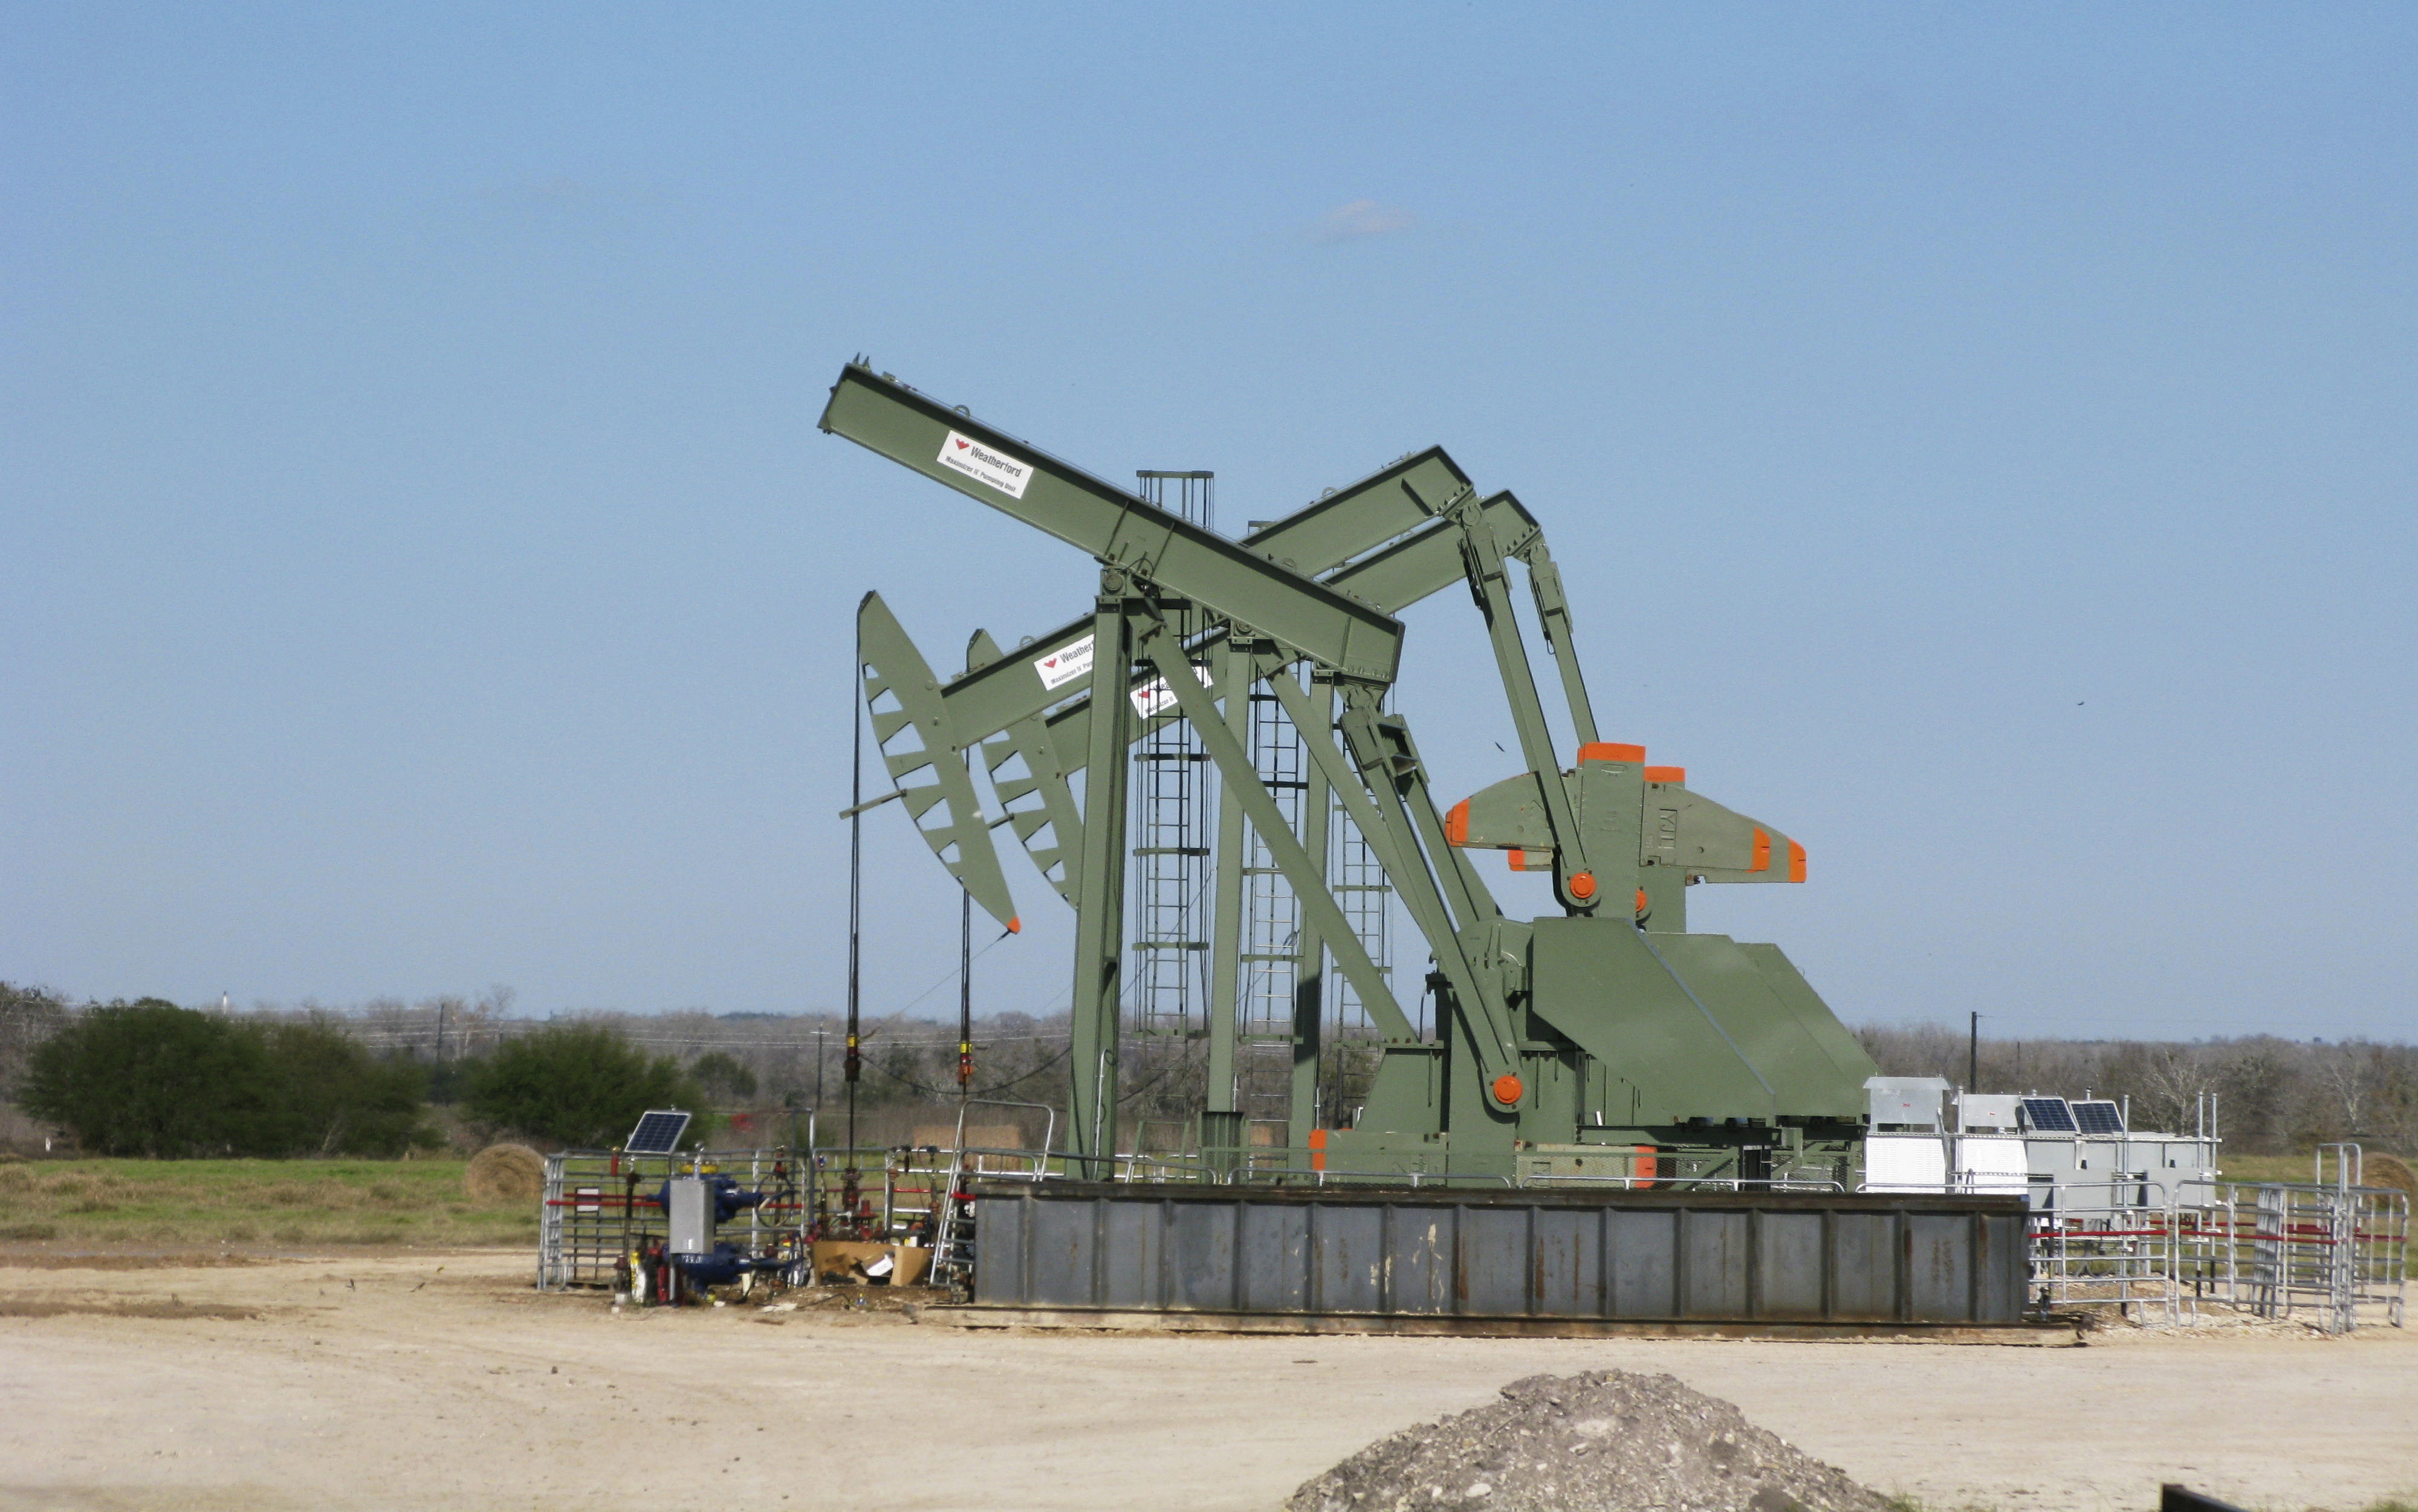 A pump jack used to help lift crude oil from a well in South Texas